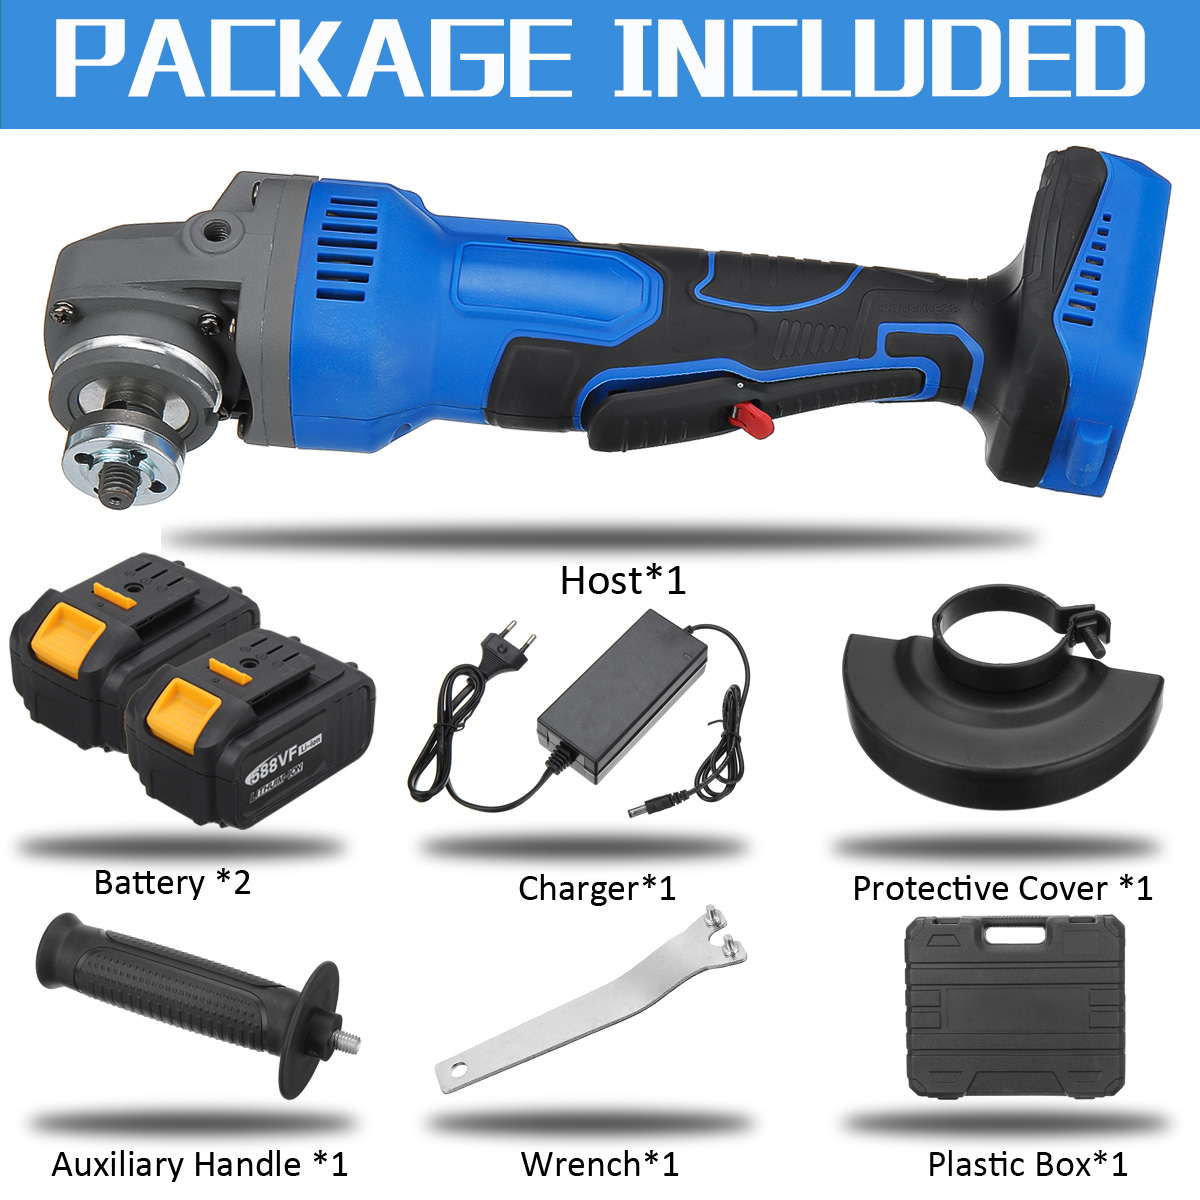 588VF-Cordless-Brushless-100mm-1580W-Electric-Angle-Grinder-3-Gears-Adjustable-Grinding-Machine-Poli-1941456-3